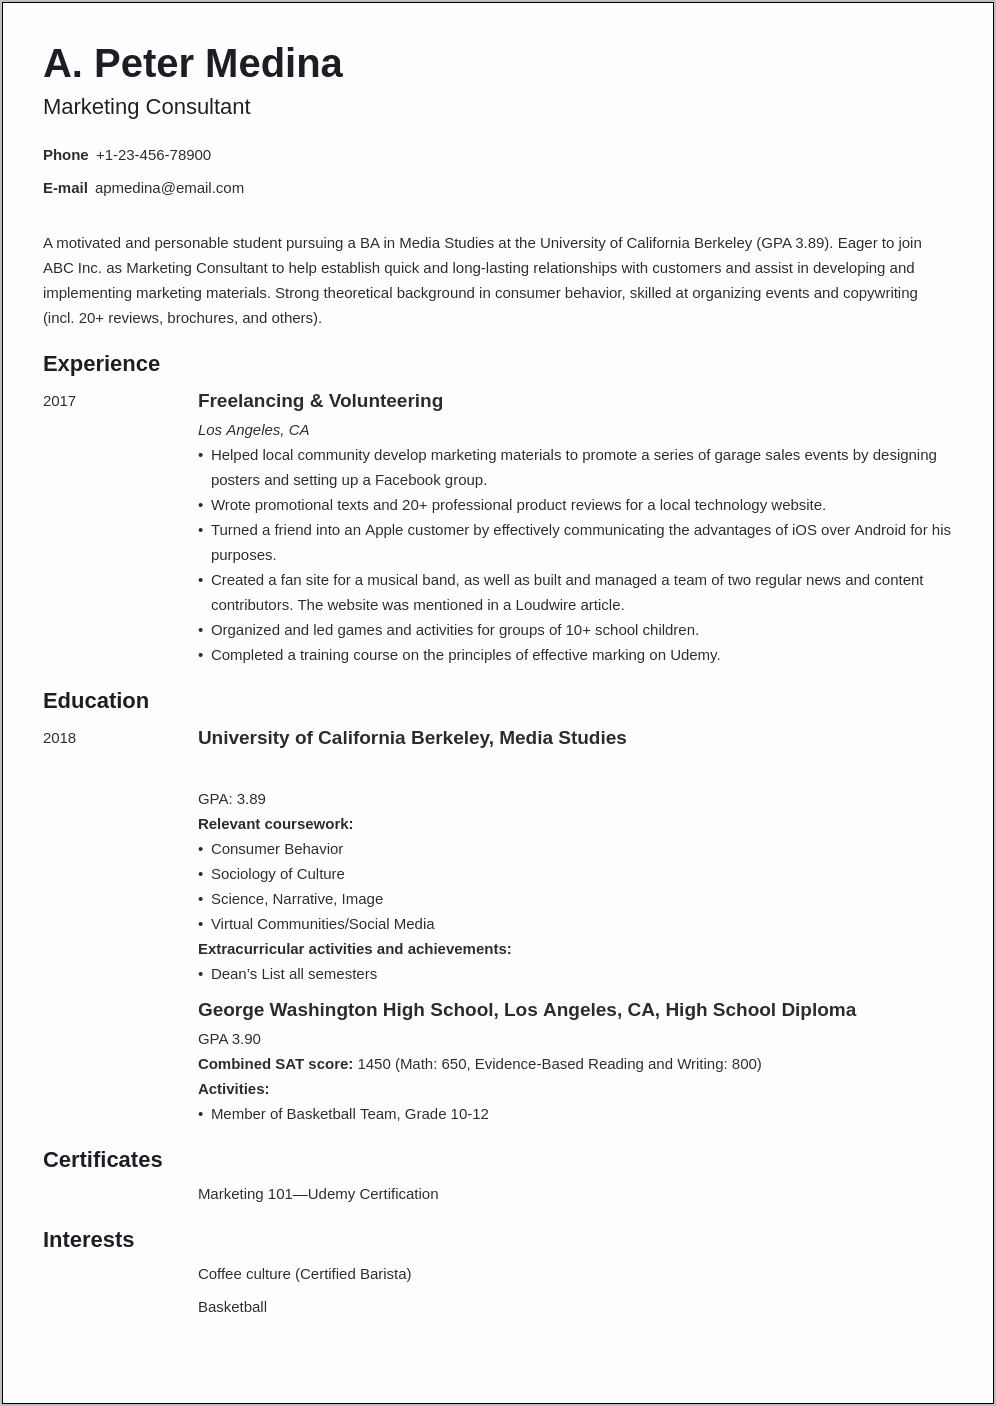 Resume Profile Samples With No Work Experience